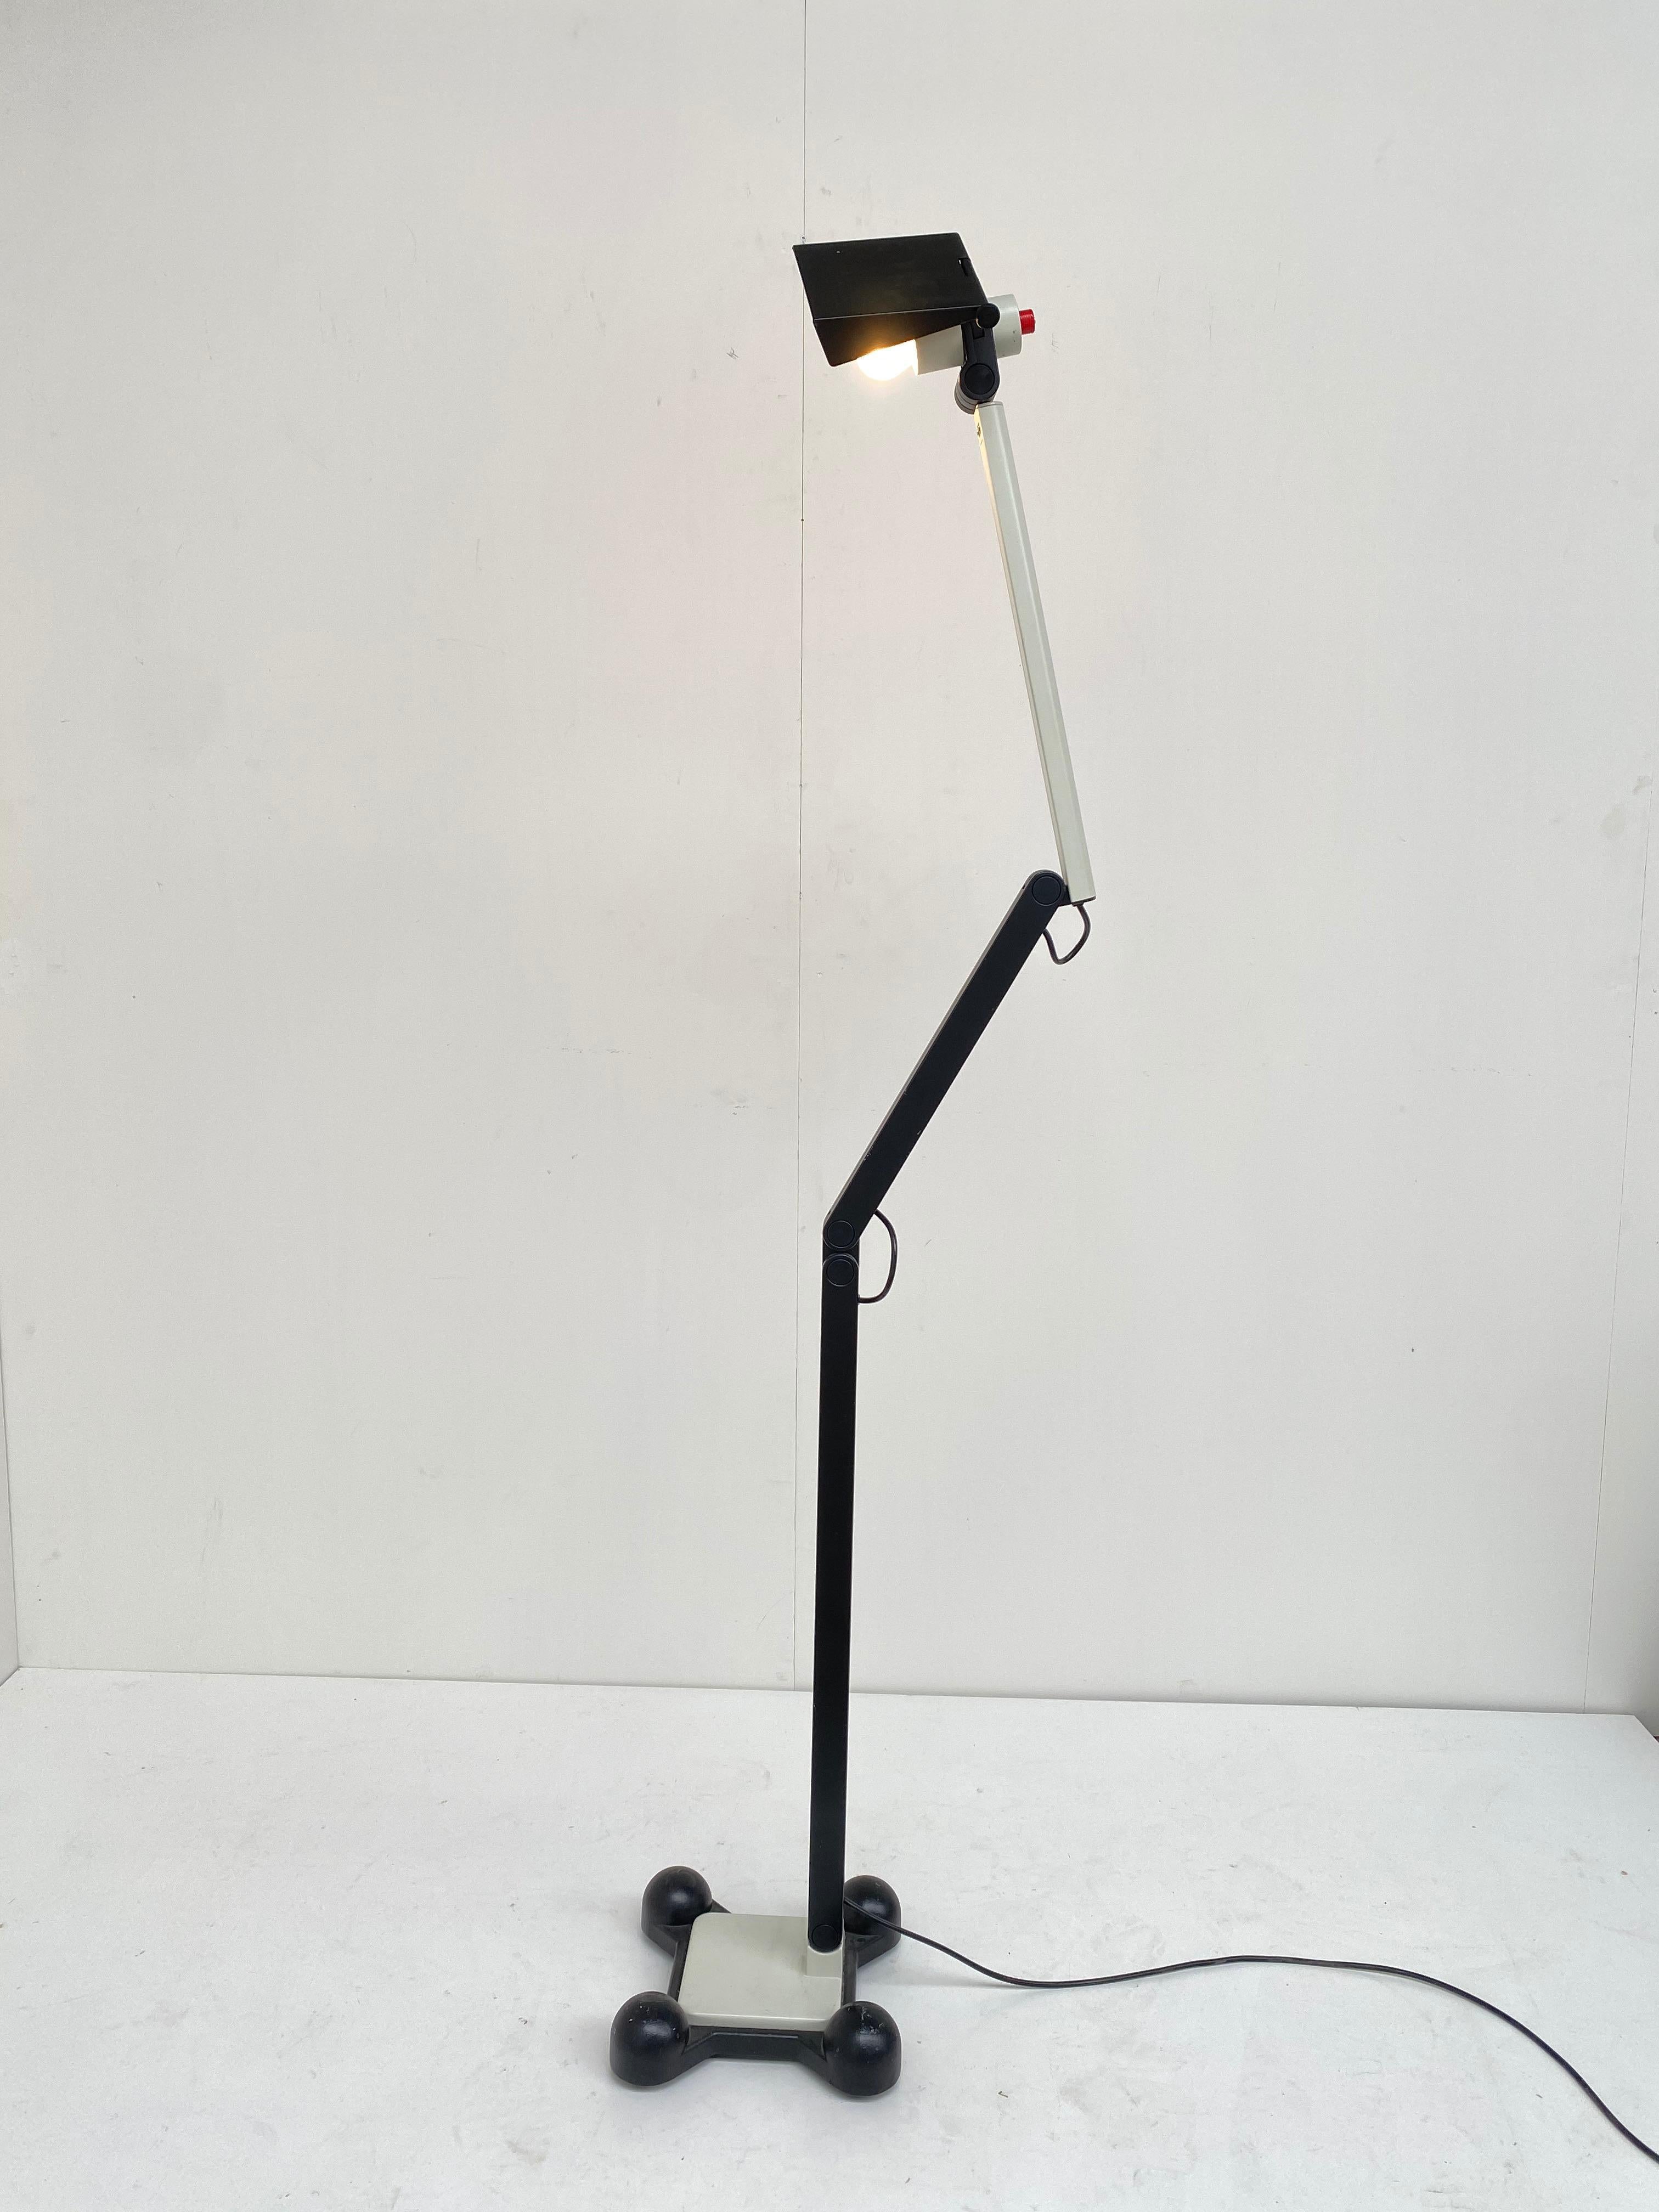 Very Rare Published Ettore Sottsass Jr. Design Floor Lamp for Erco Germany, 1973 4